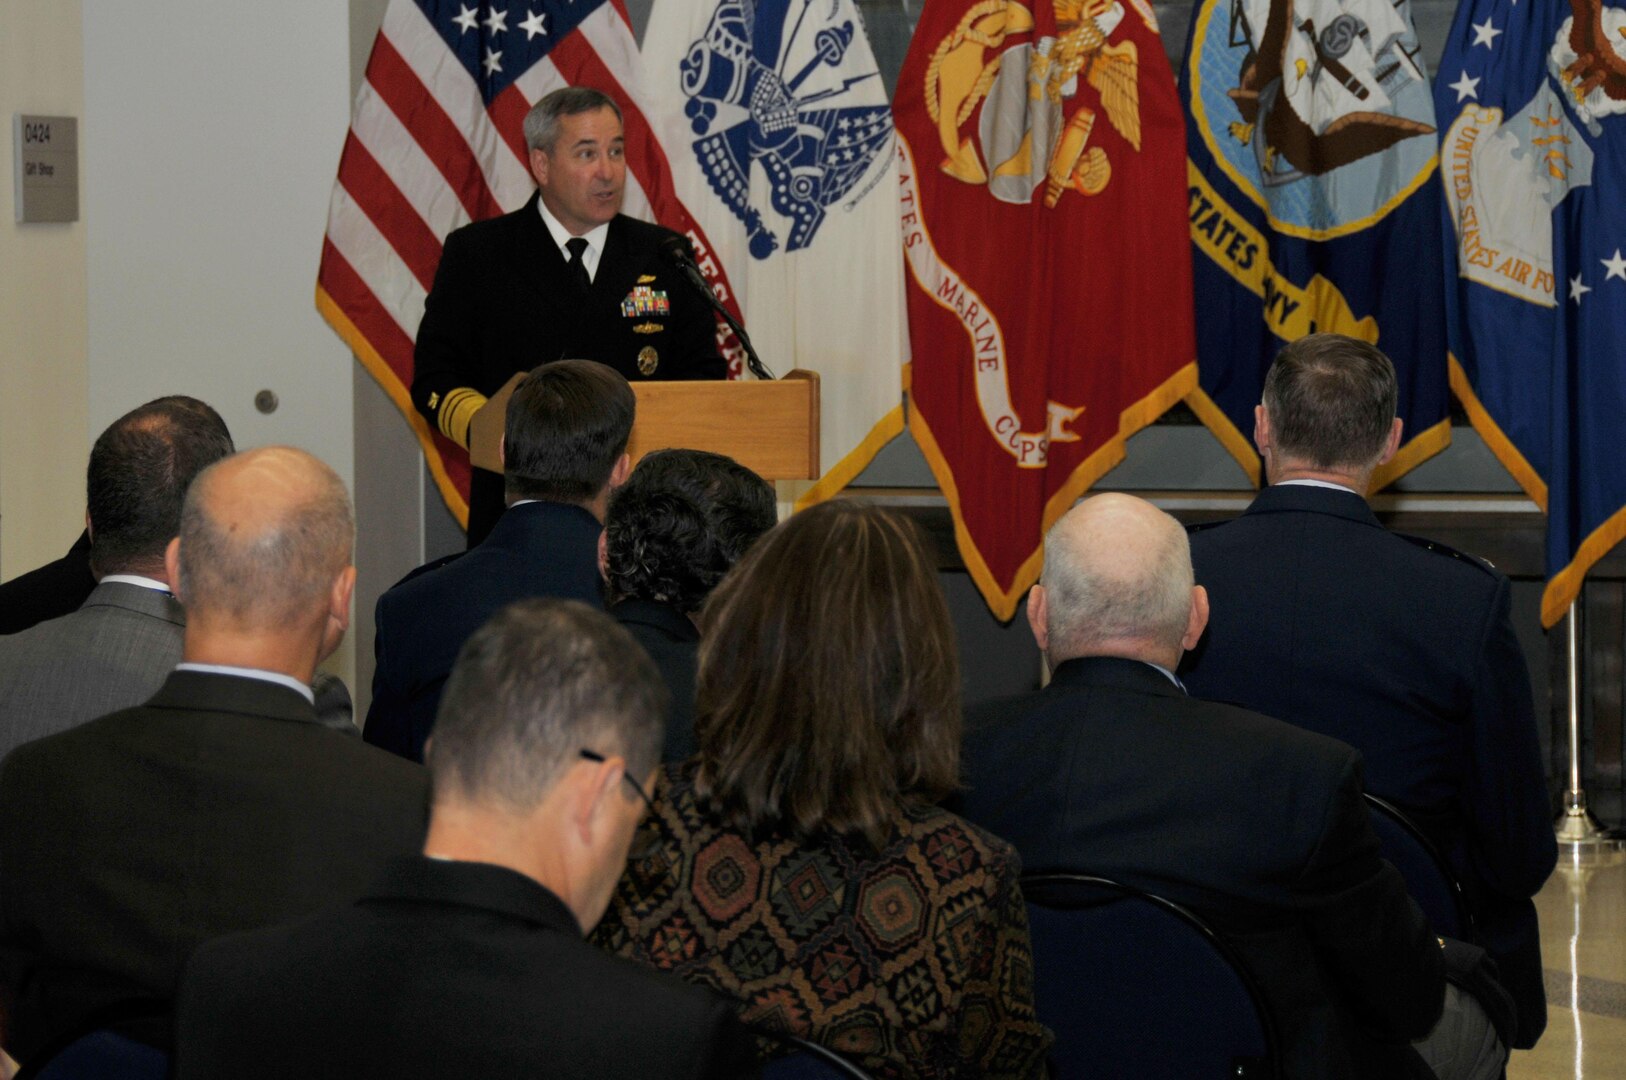 Navy Vice Adm. William Brown, director of logistics for the Joint Chiefs of Staff, describes the successes of the U.S. Navy during a celebration of the service’s 240th birthday at the McNamara Headquarters Complex Oct. 13.